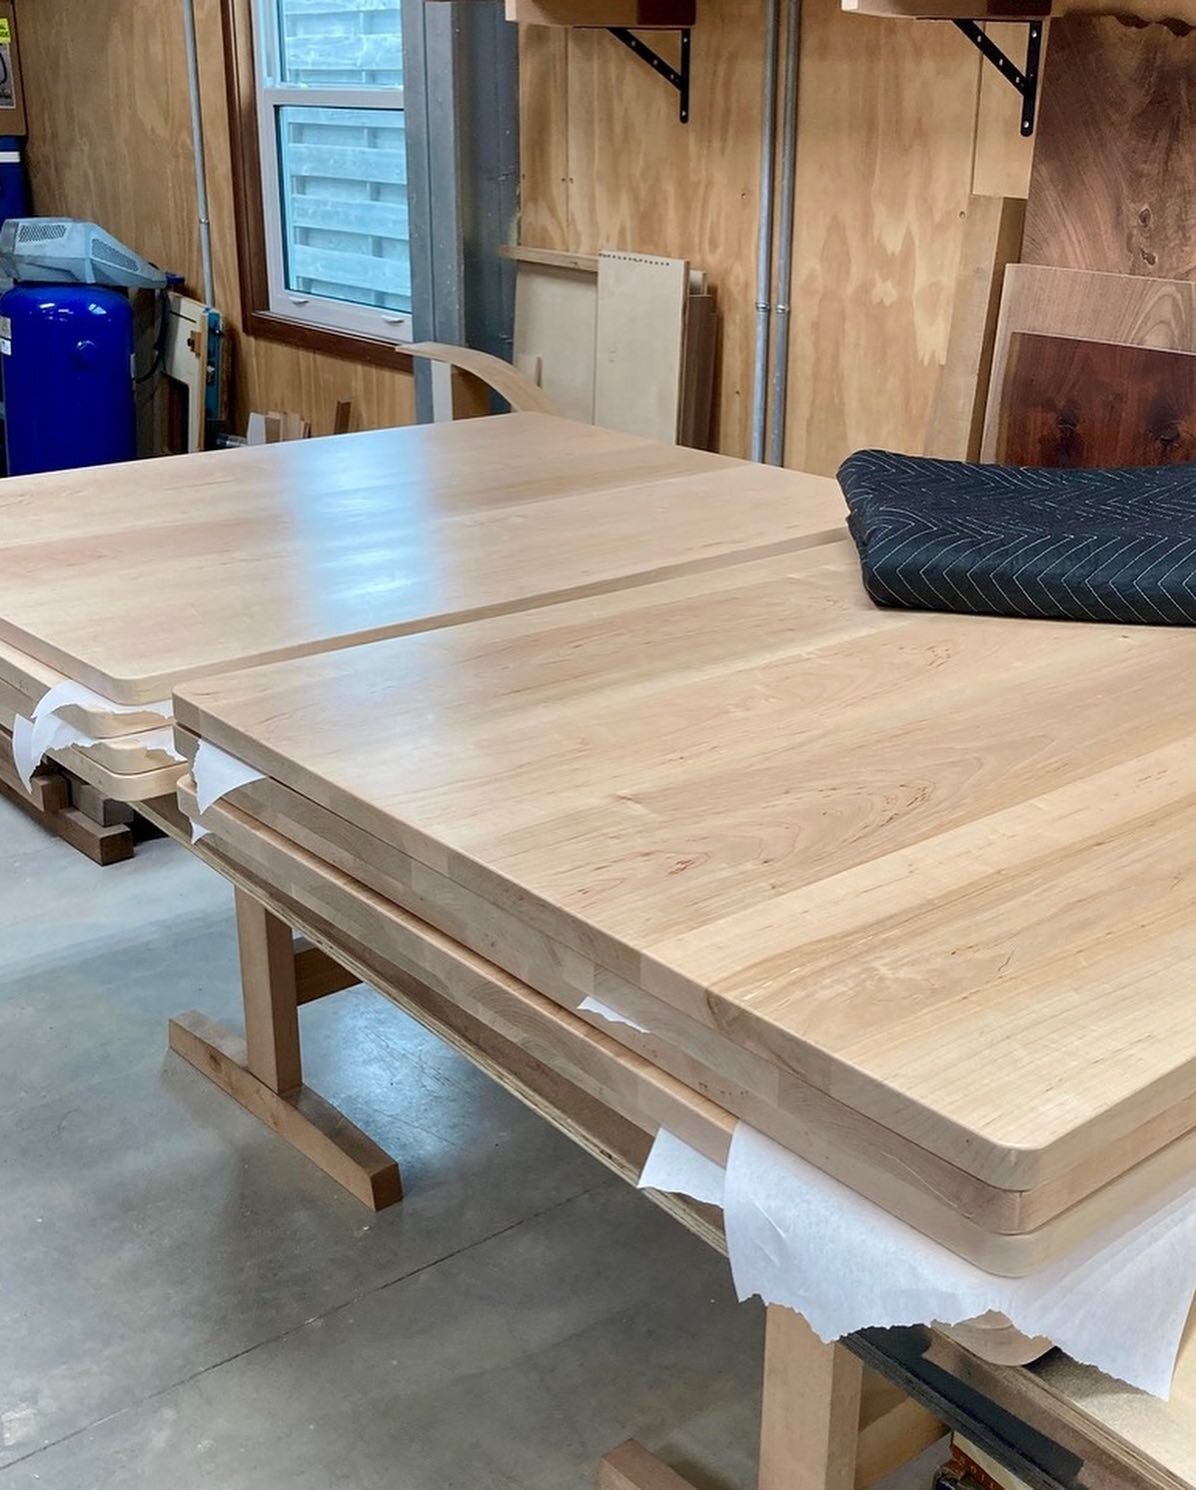 Nine maple table tops out for delivery tomorrow. The objects I make are usually one of one, so this was as mass-production as things get. The challenge was to devote attention to each 250+ square foot of surface and about the same linear feet of edge